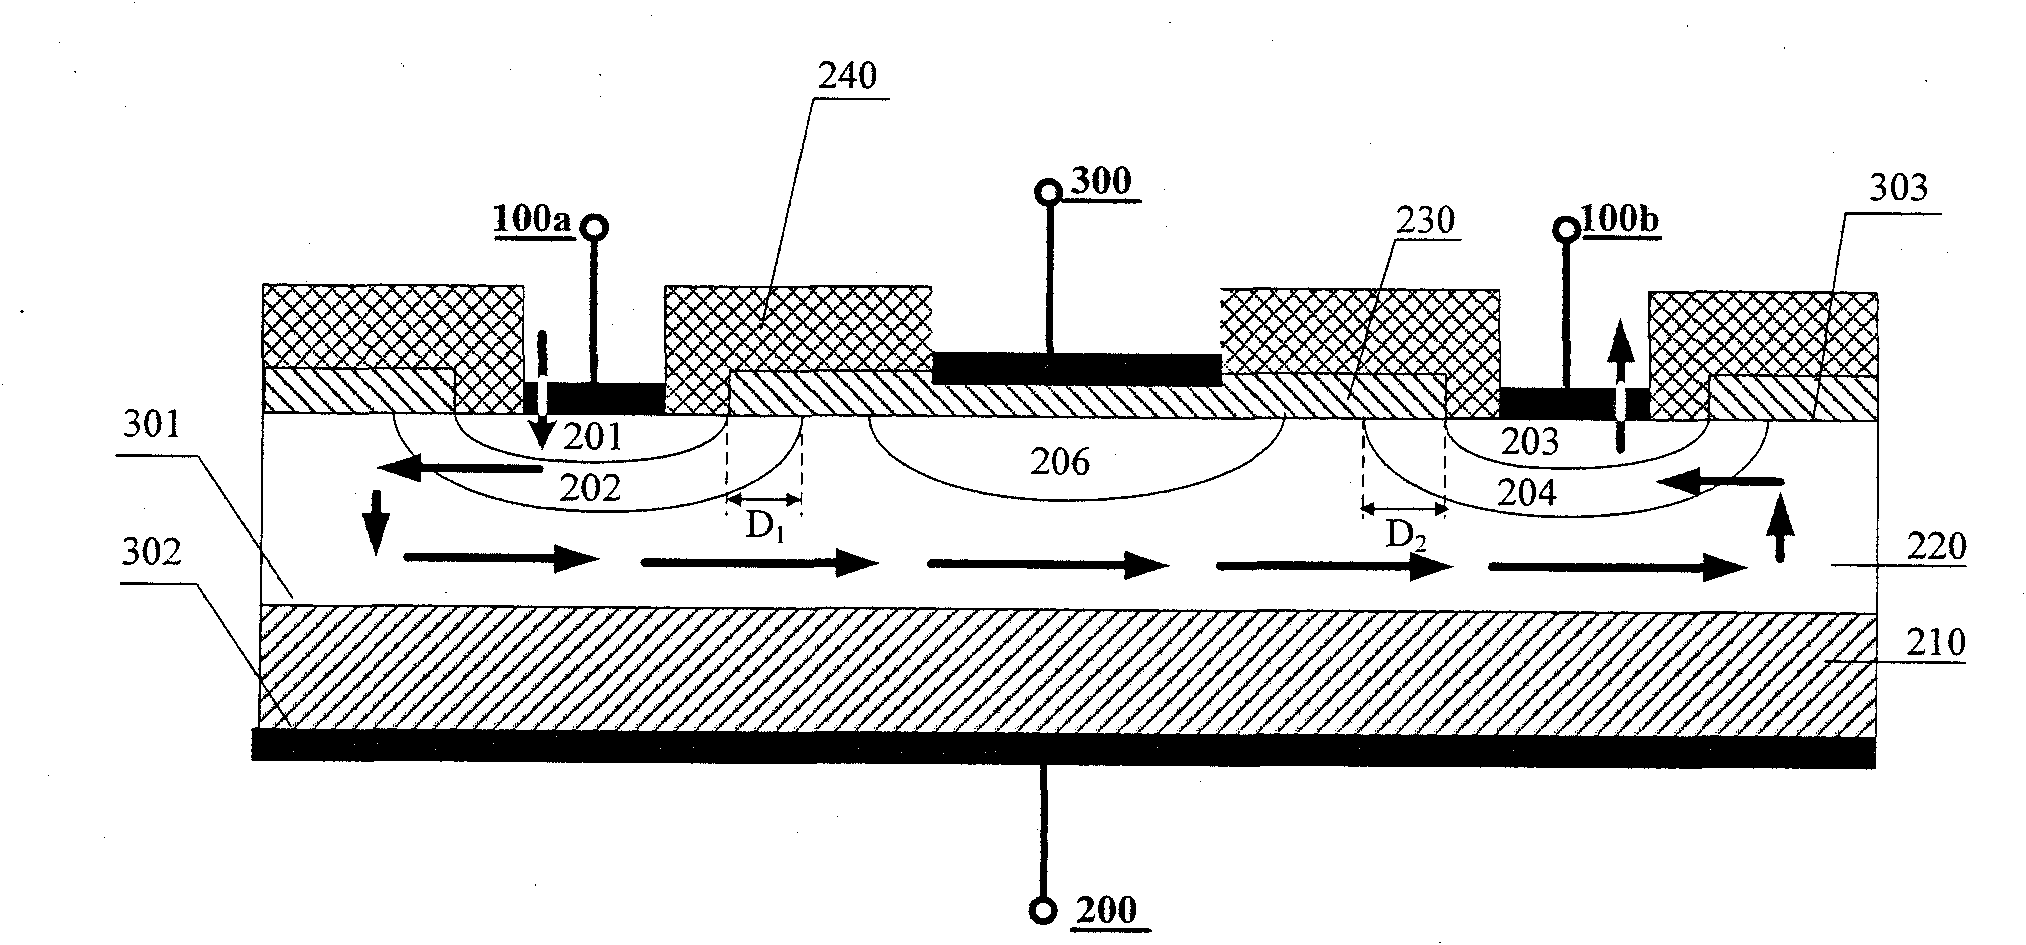 VDMOS (Vertical Double-diffusing Metal-Oxide-Semiconductor) transistor testing structure